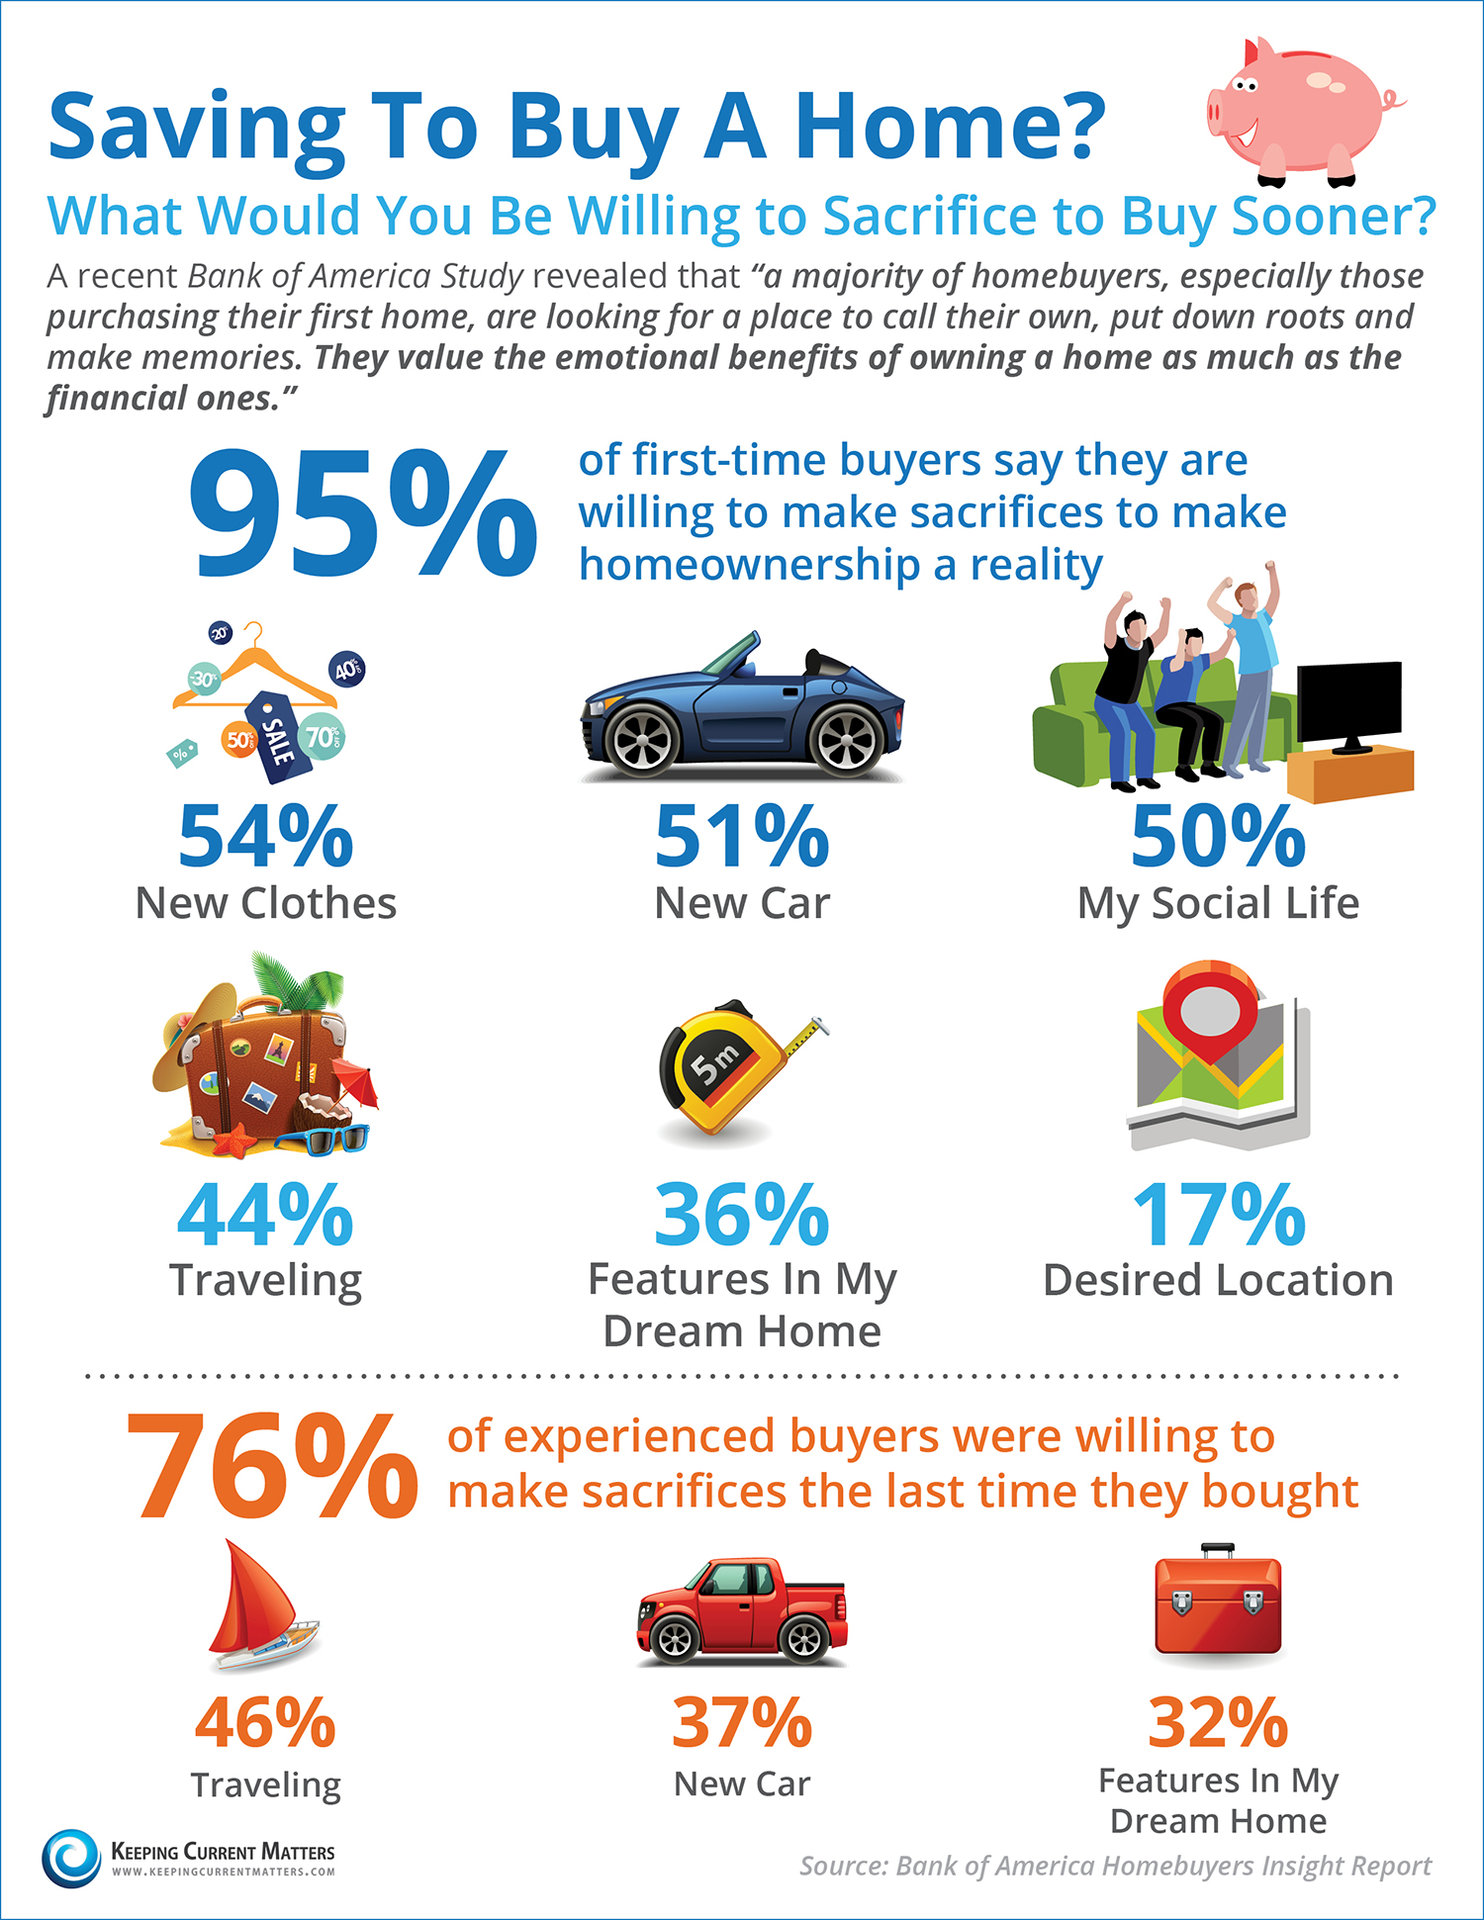 Saving To Buy A Home? What Would You Sacrifice? [INFOGRAPHIC] | Keeping Current Matters